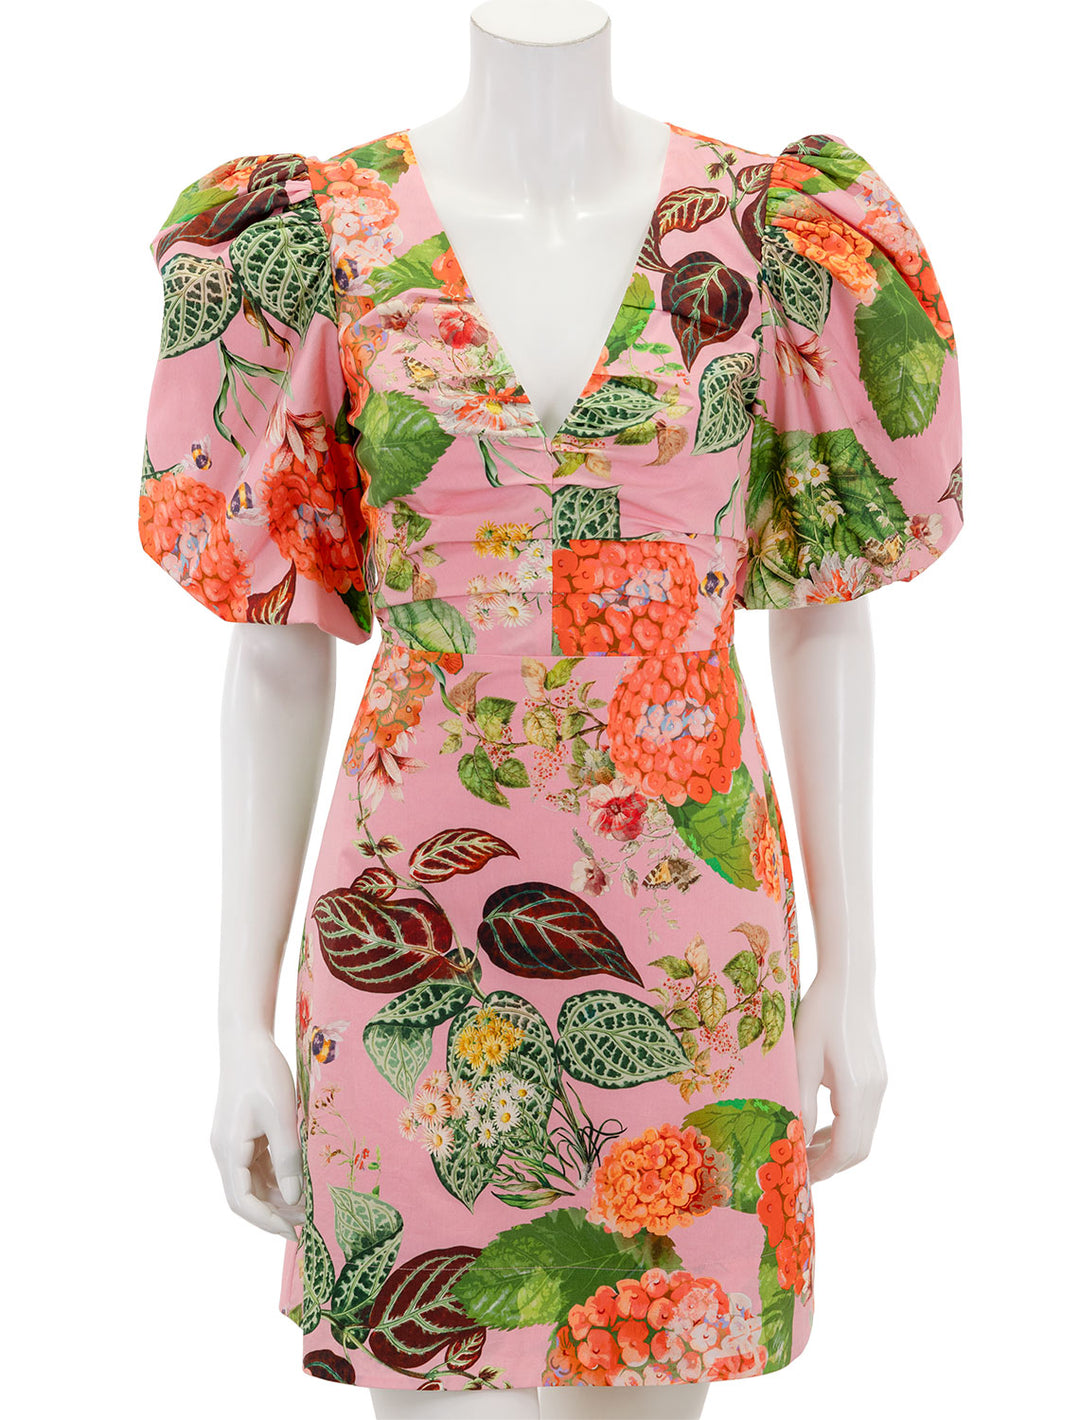 Front view of Cara Cara's Aliza Dress in Avery Floral Pink.